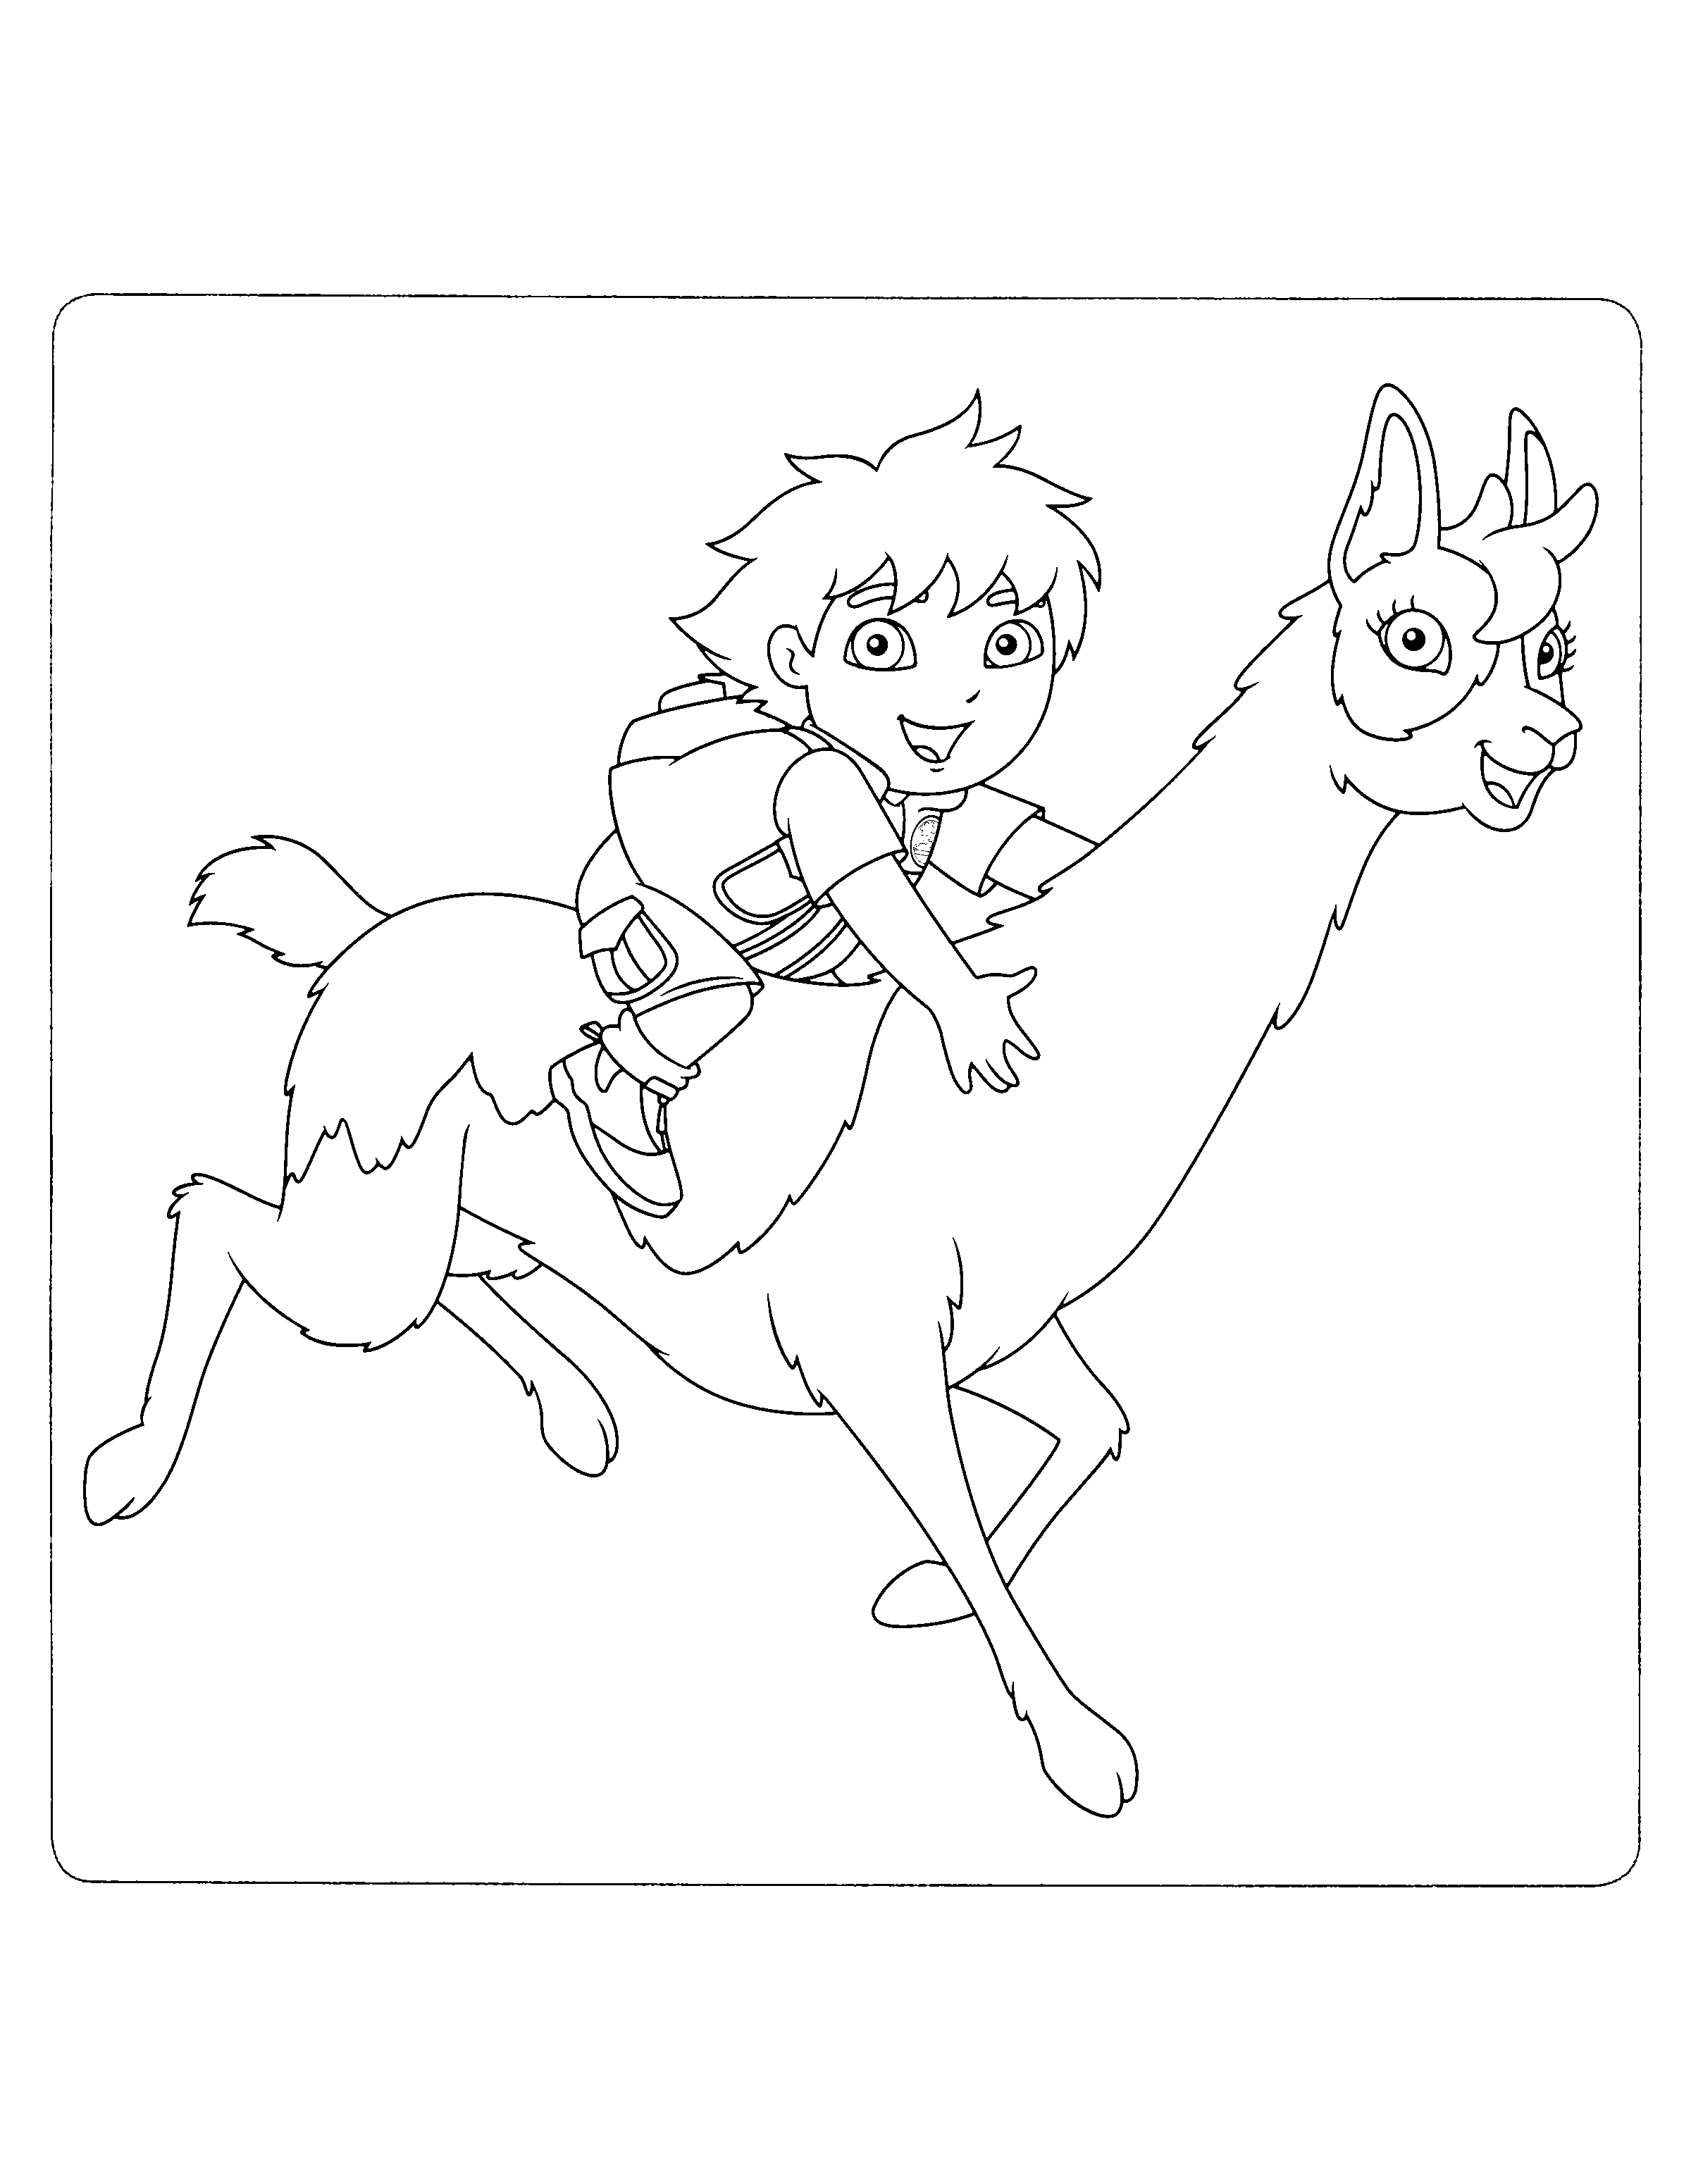 Diego And Lama coloring page